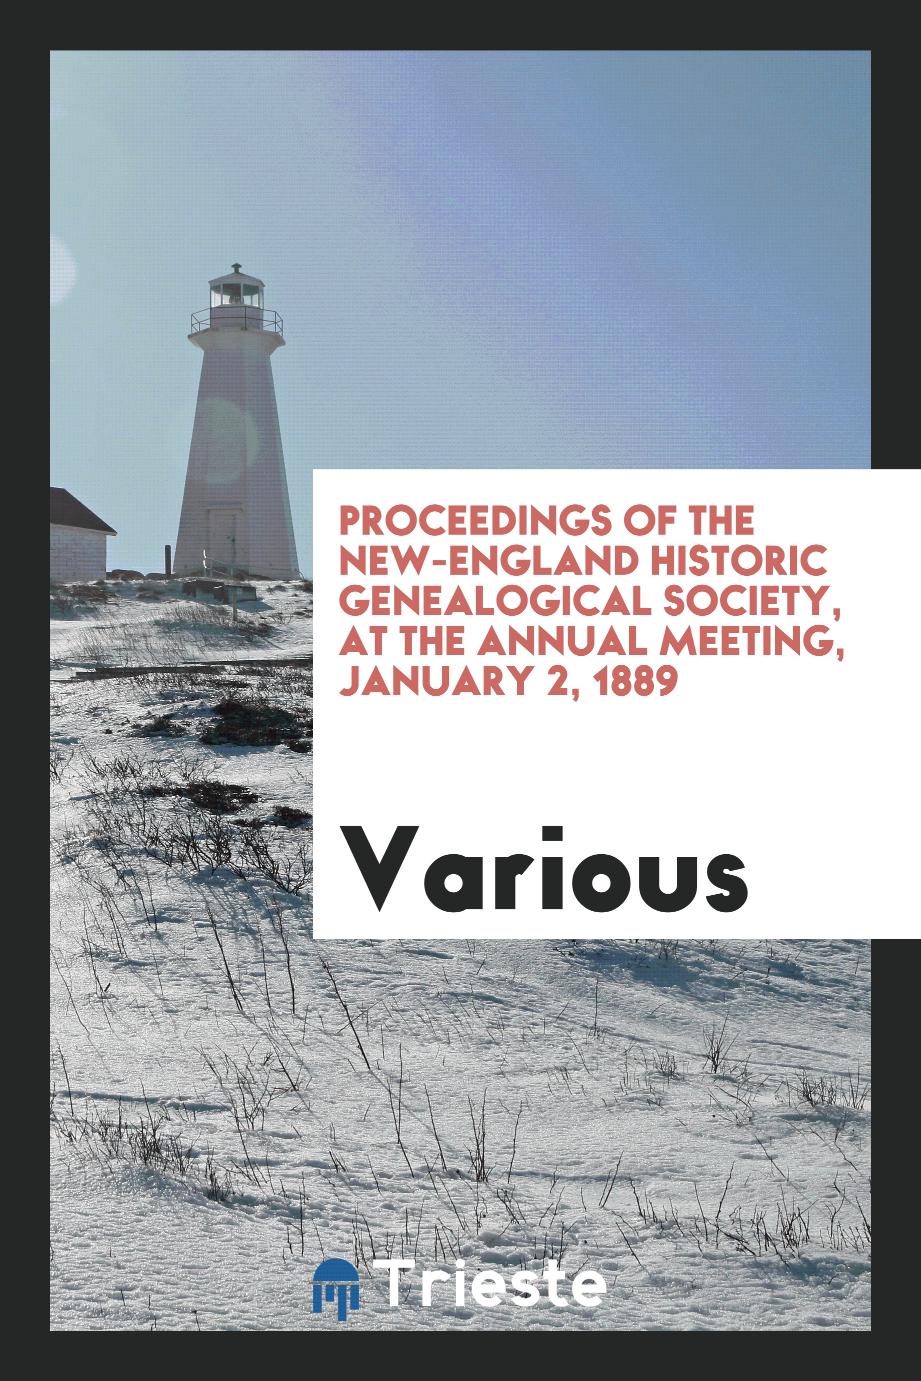 Proceedings of the New-England Historic Genealogical Society, at the Annual Meeting, January 2, 1889